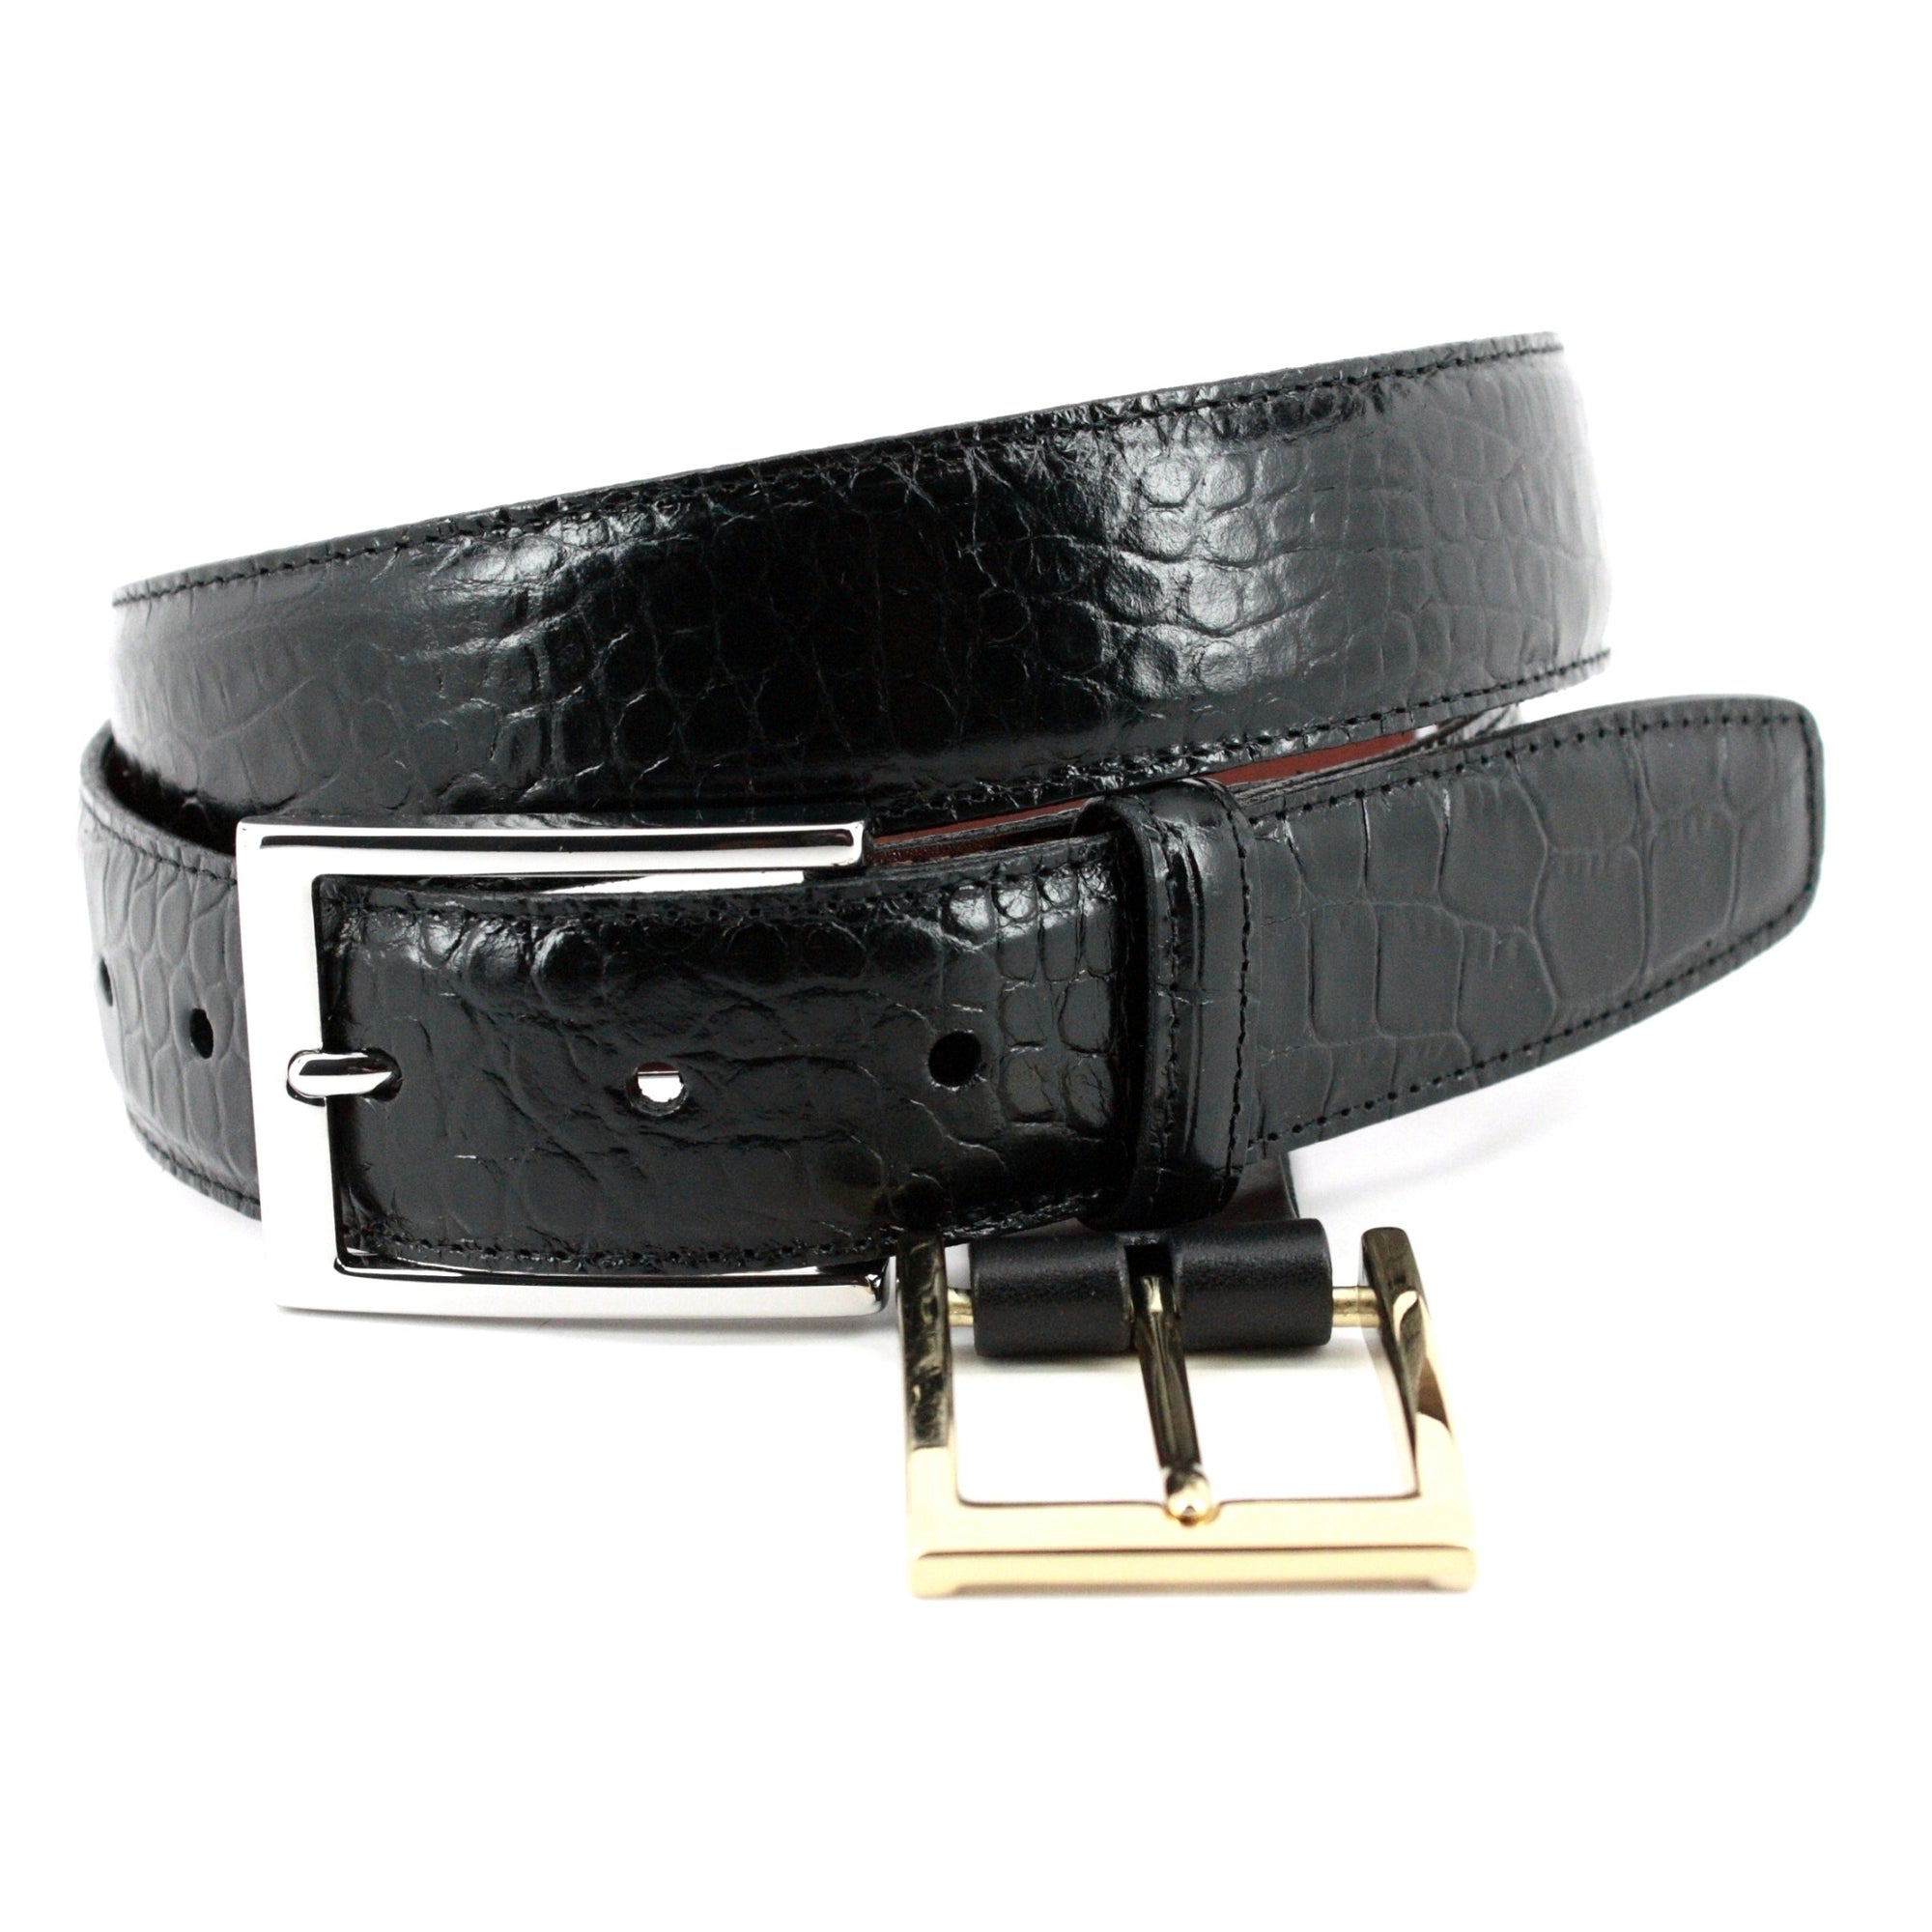 Alligator Grain Embossed Calfskin Belt with Interchangeable Buckles in Black by Torino Leather